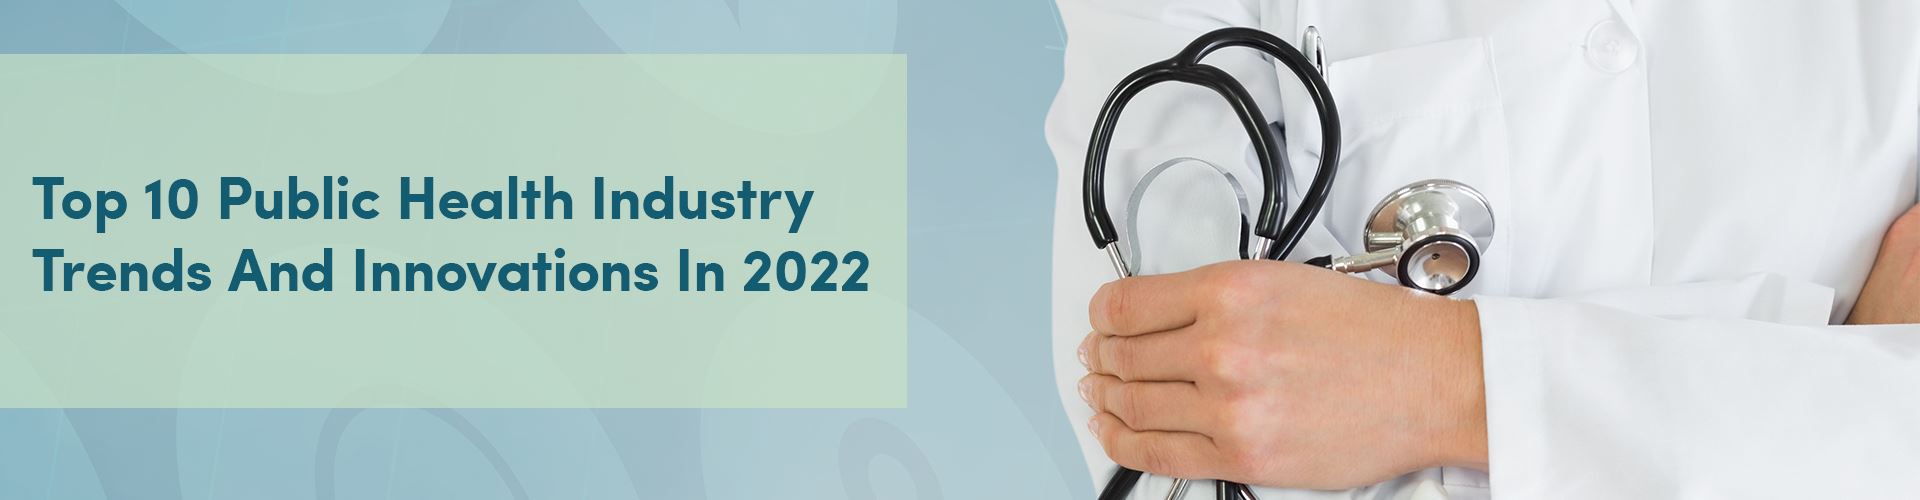 Top 10 Public Health Industry Trends And Innovations In 2022